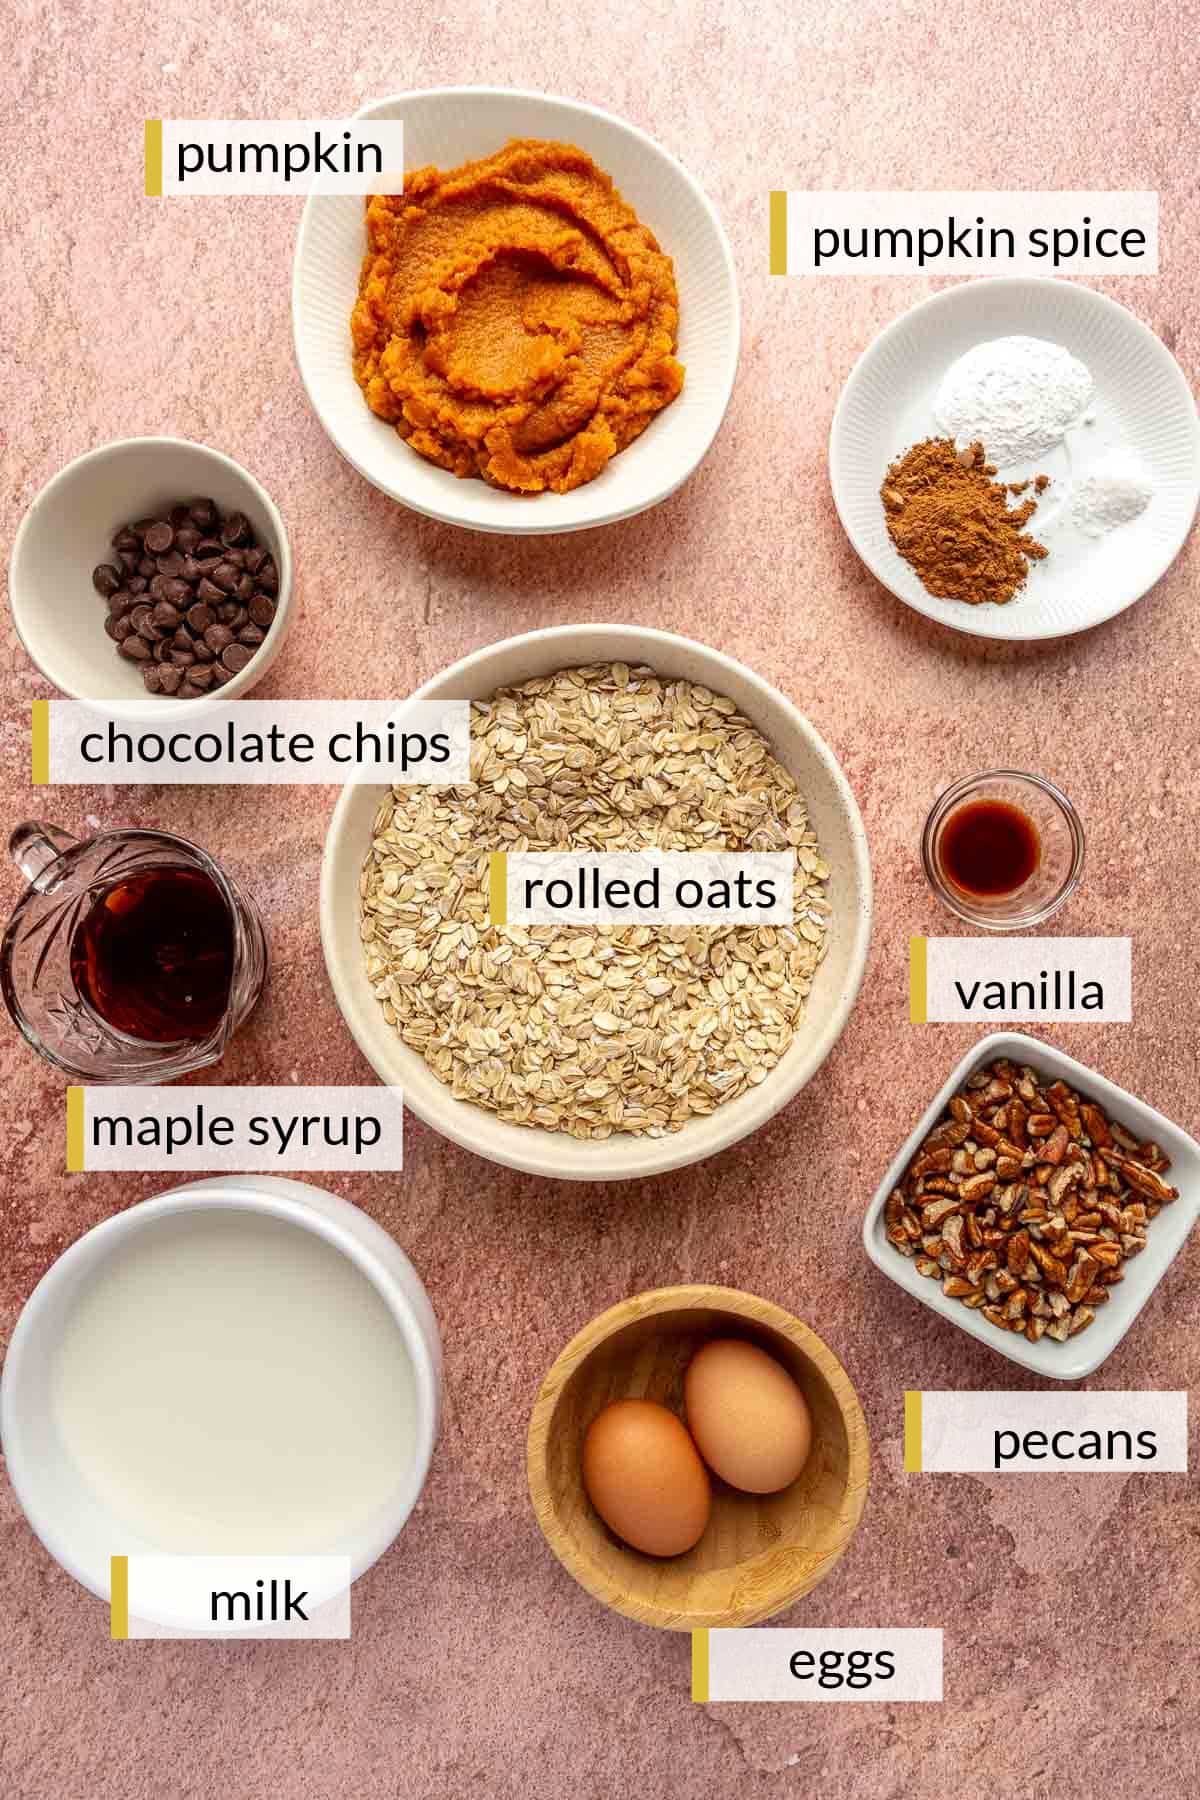 Oats, pumpkin, milk, spices, vanilla, eggs, pecans and chocolate chips divided into small bowls.